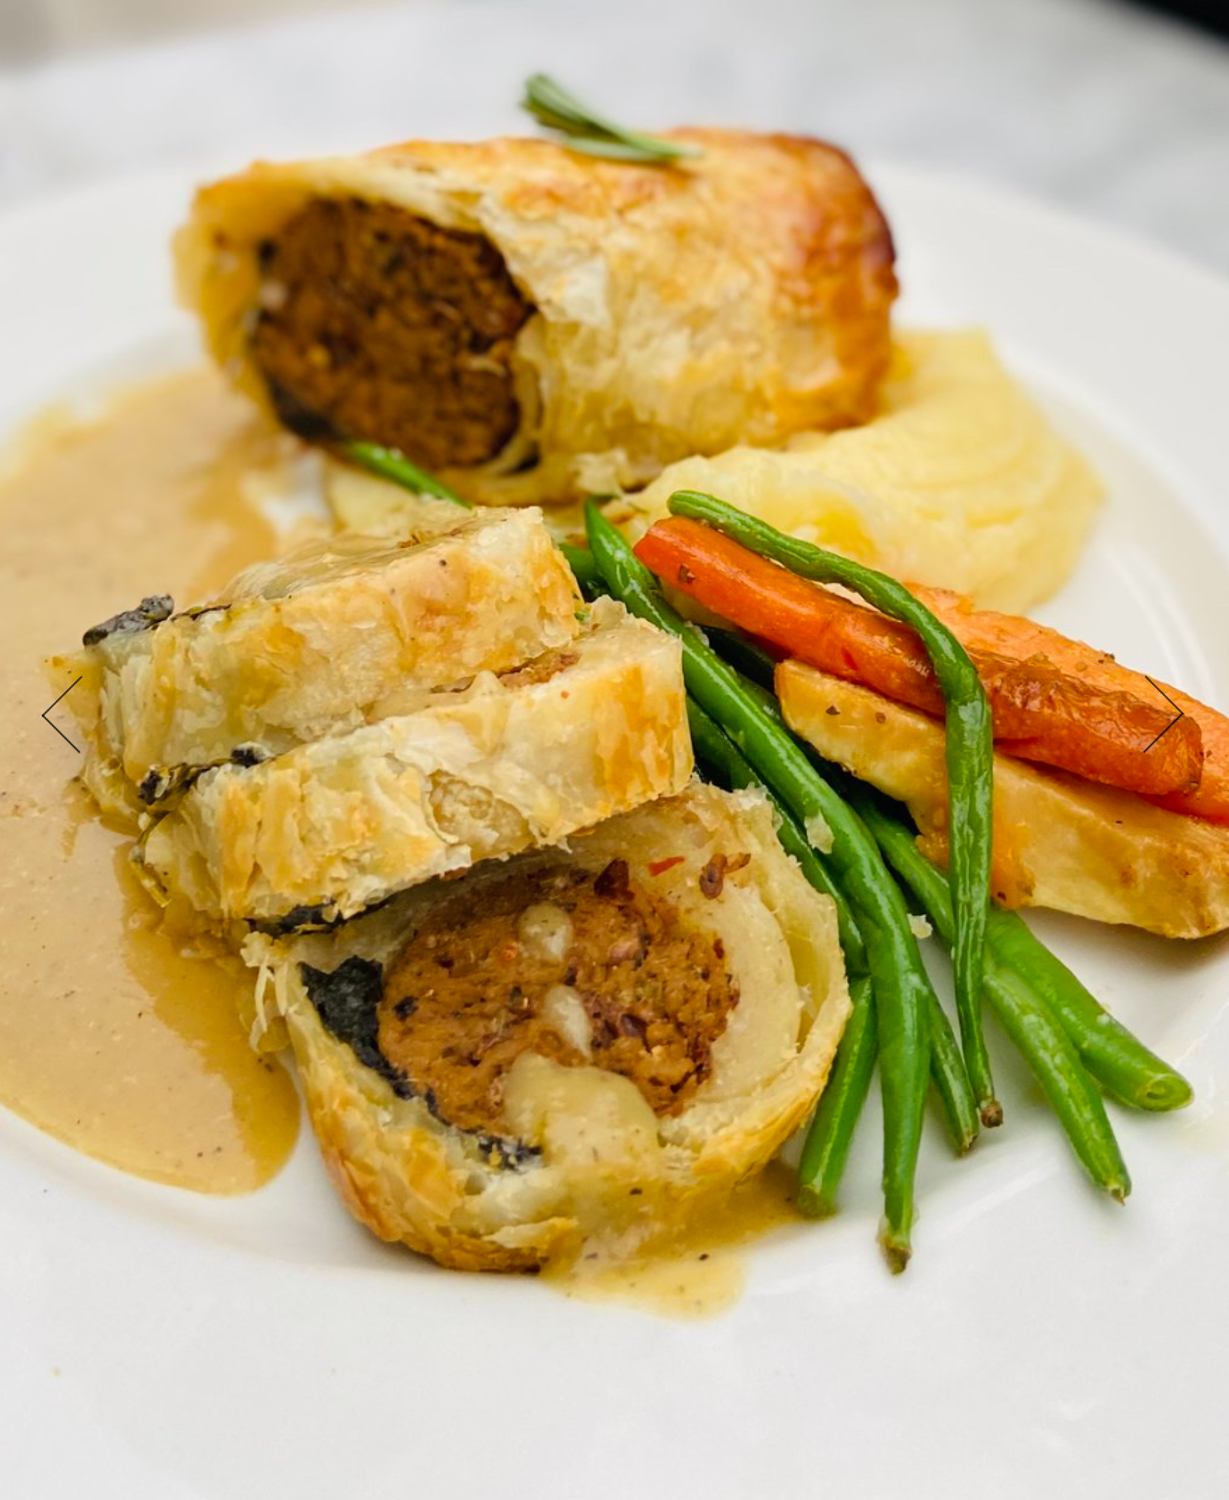 Rustic Sausage Roll at Revel Foods Canada in Oakville | Revel Foods Canada